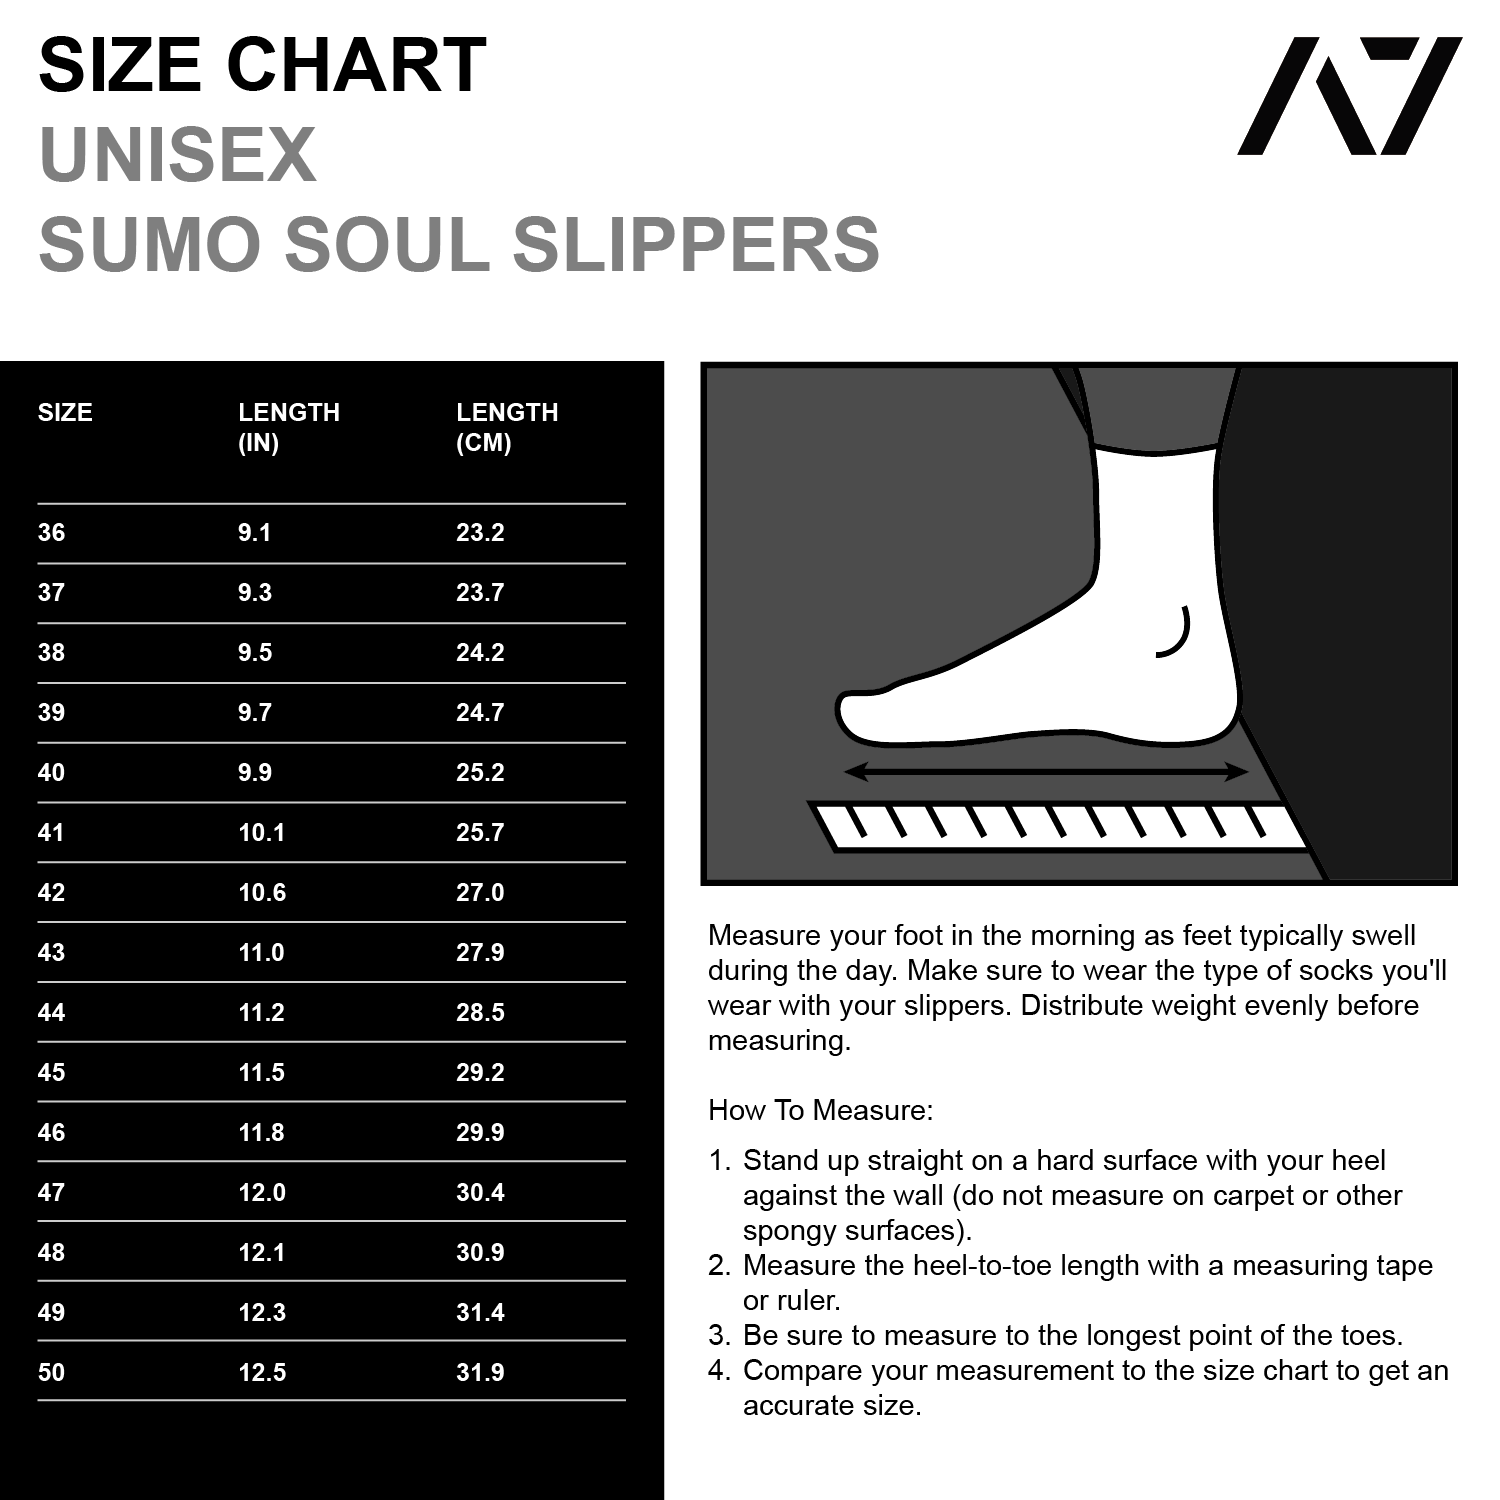 Simply designed with you in mind. With a 5 mm thin rubber grip sole, single pull diagonal/ Centre tension strap, all plastic components to allow easy washing, and even a convenient storage bag. These Soul Sumo v2 slippers are sure to impress. These slippers are ultra-compact and when rolled up are about the size of your wrist wraps. Our Soul Sumo Slippers are approved for IPF competitions and make a great addition to any IPF approved kit! A7 UK shipping to UK and Europe.